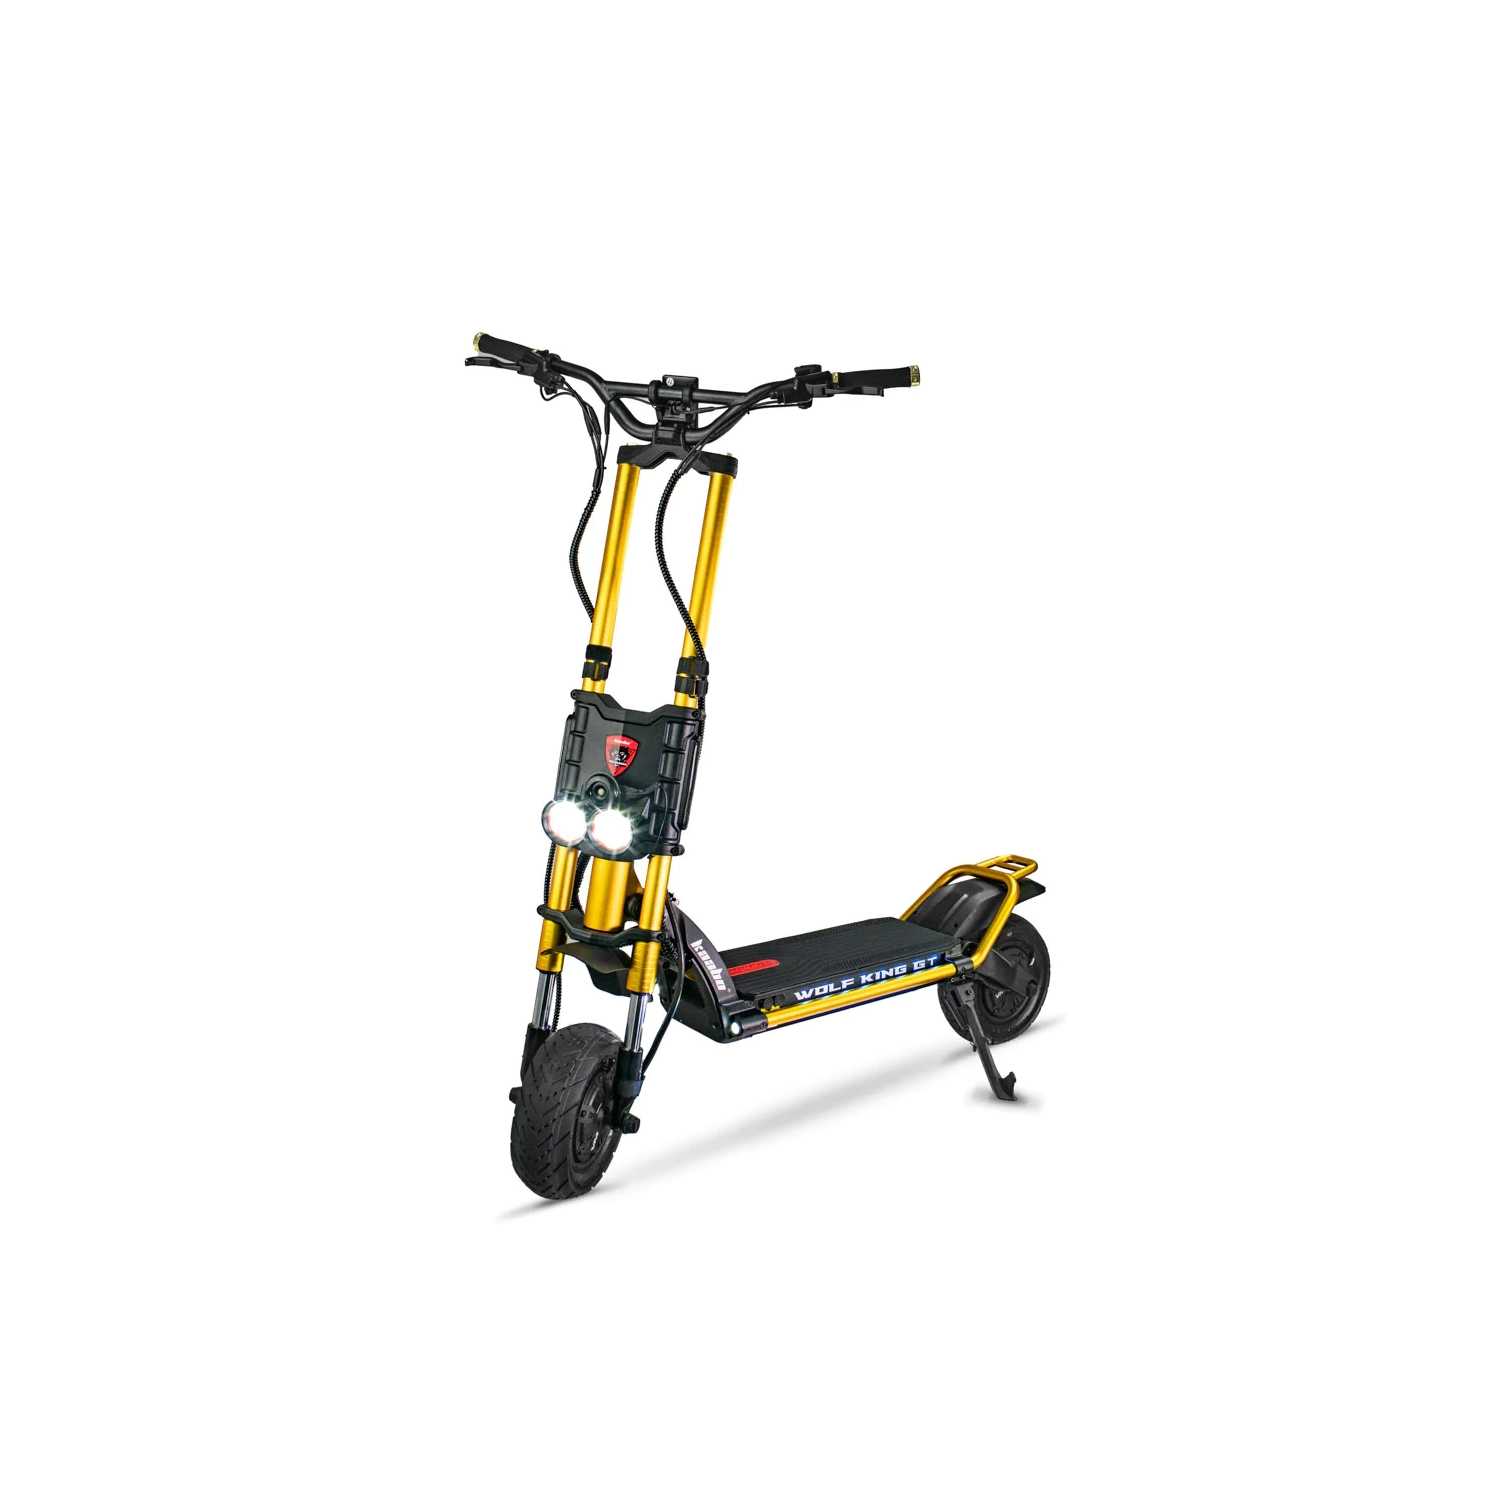 Kaabo Wolf King GT Pro Electric Scooter (72V, 35Ah Samsung) | Sine Wave Controllers | Dual Motor | Full Suspension | 119KM Range | 101KM/h Top Speed | Off-Road Tires | Gold